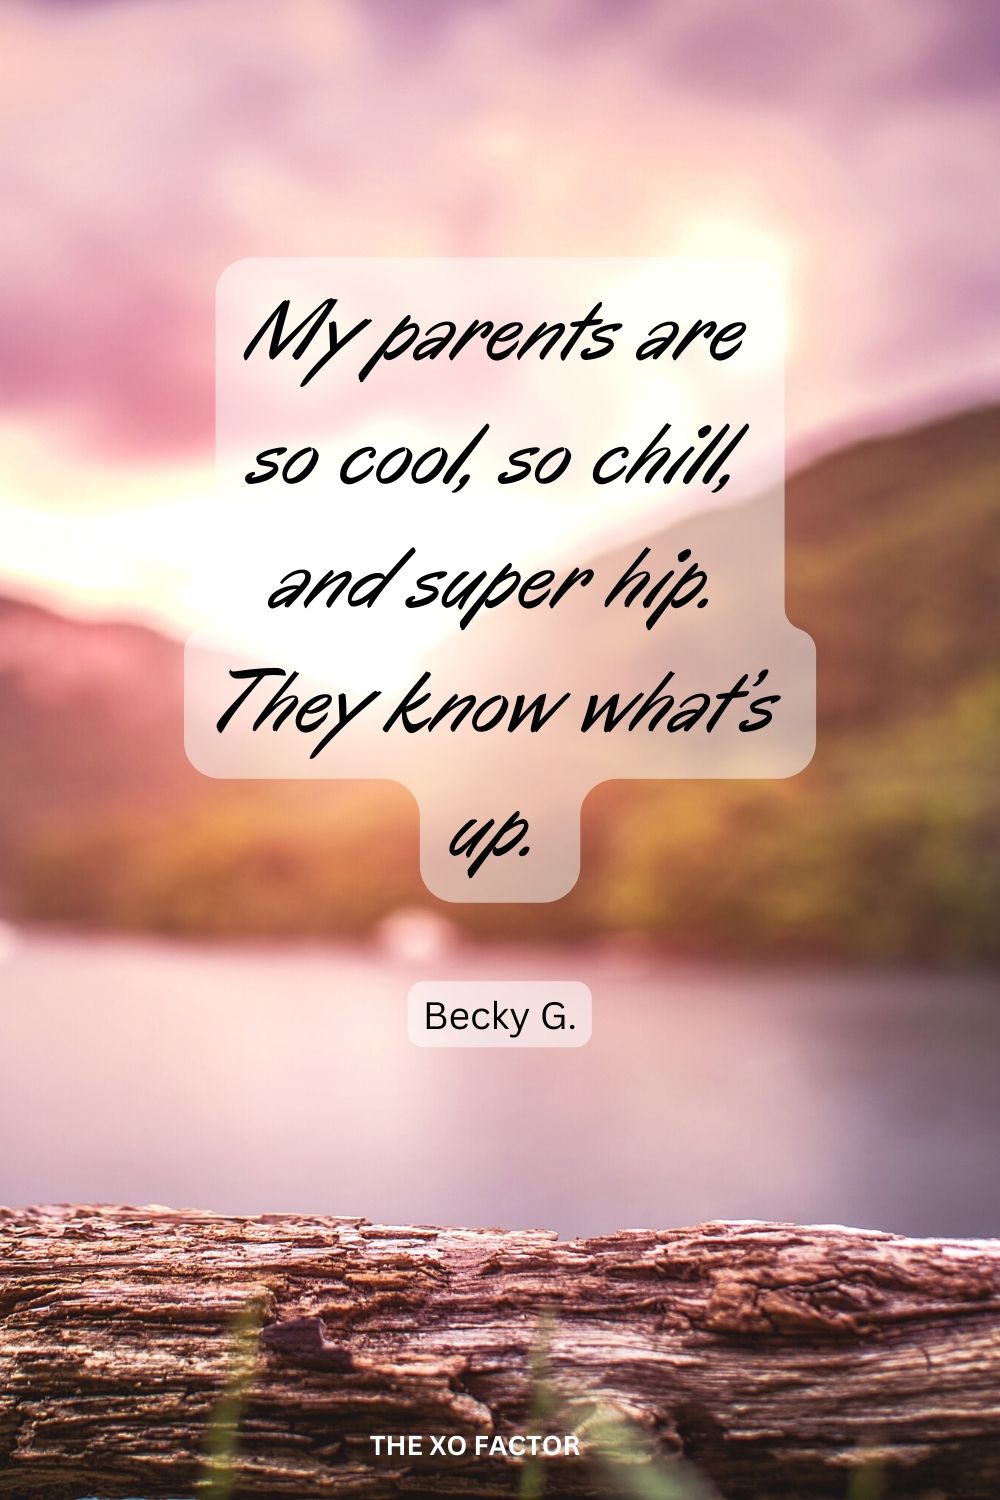 My parents are so cool, so chill, and super hip. They know what’s up.
Becky G.